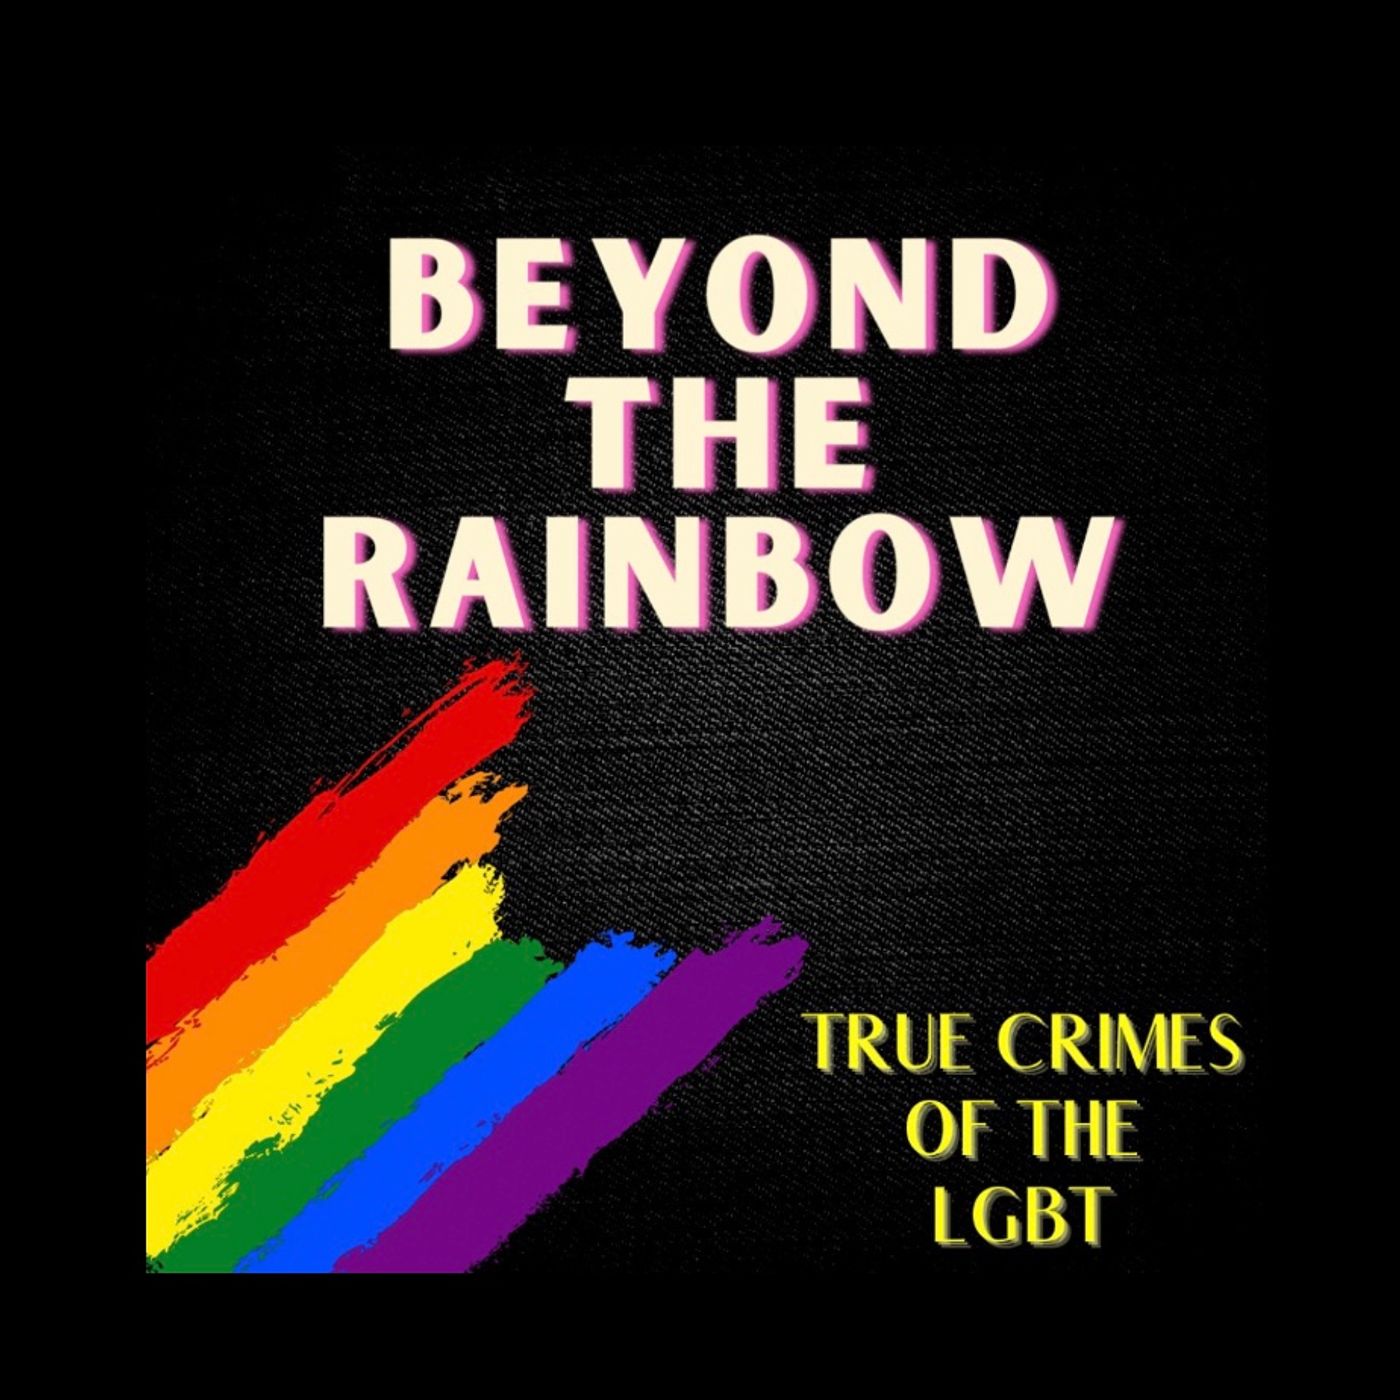 Beyond The Rainbow - True Crimes of the LGBT   The Oracl3 Network